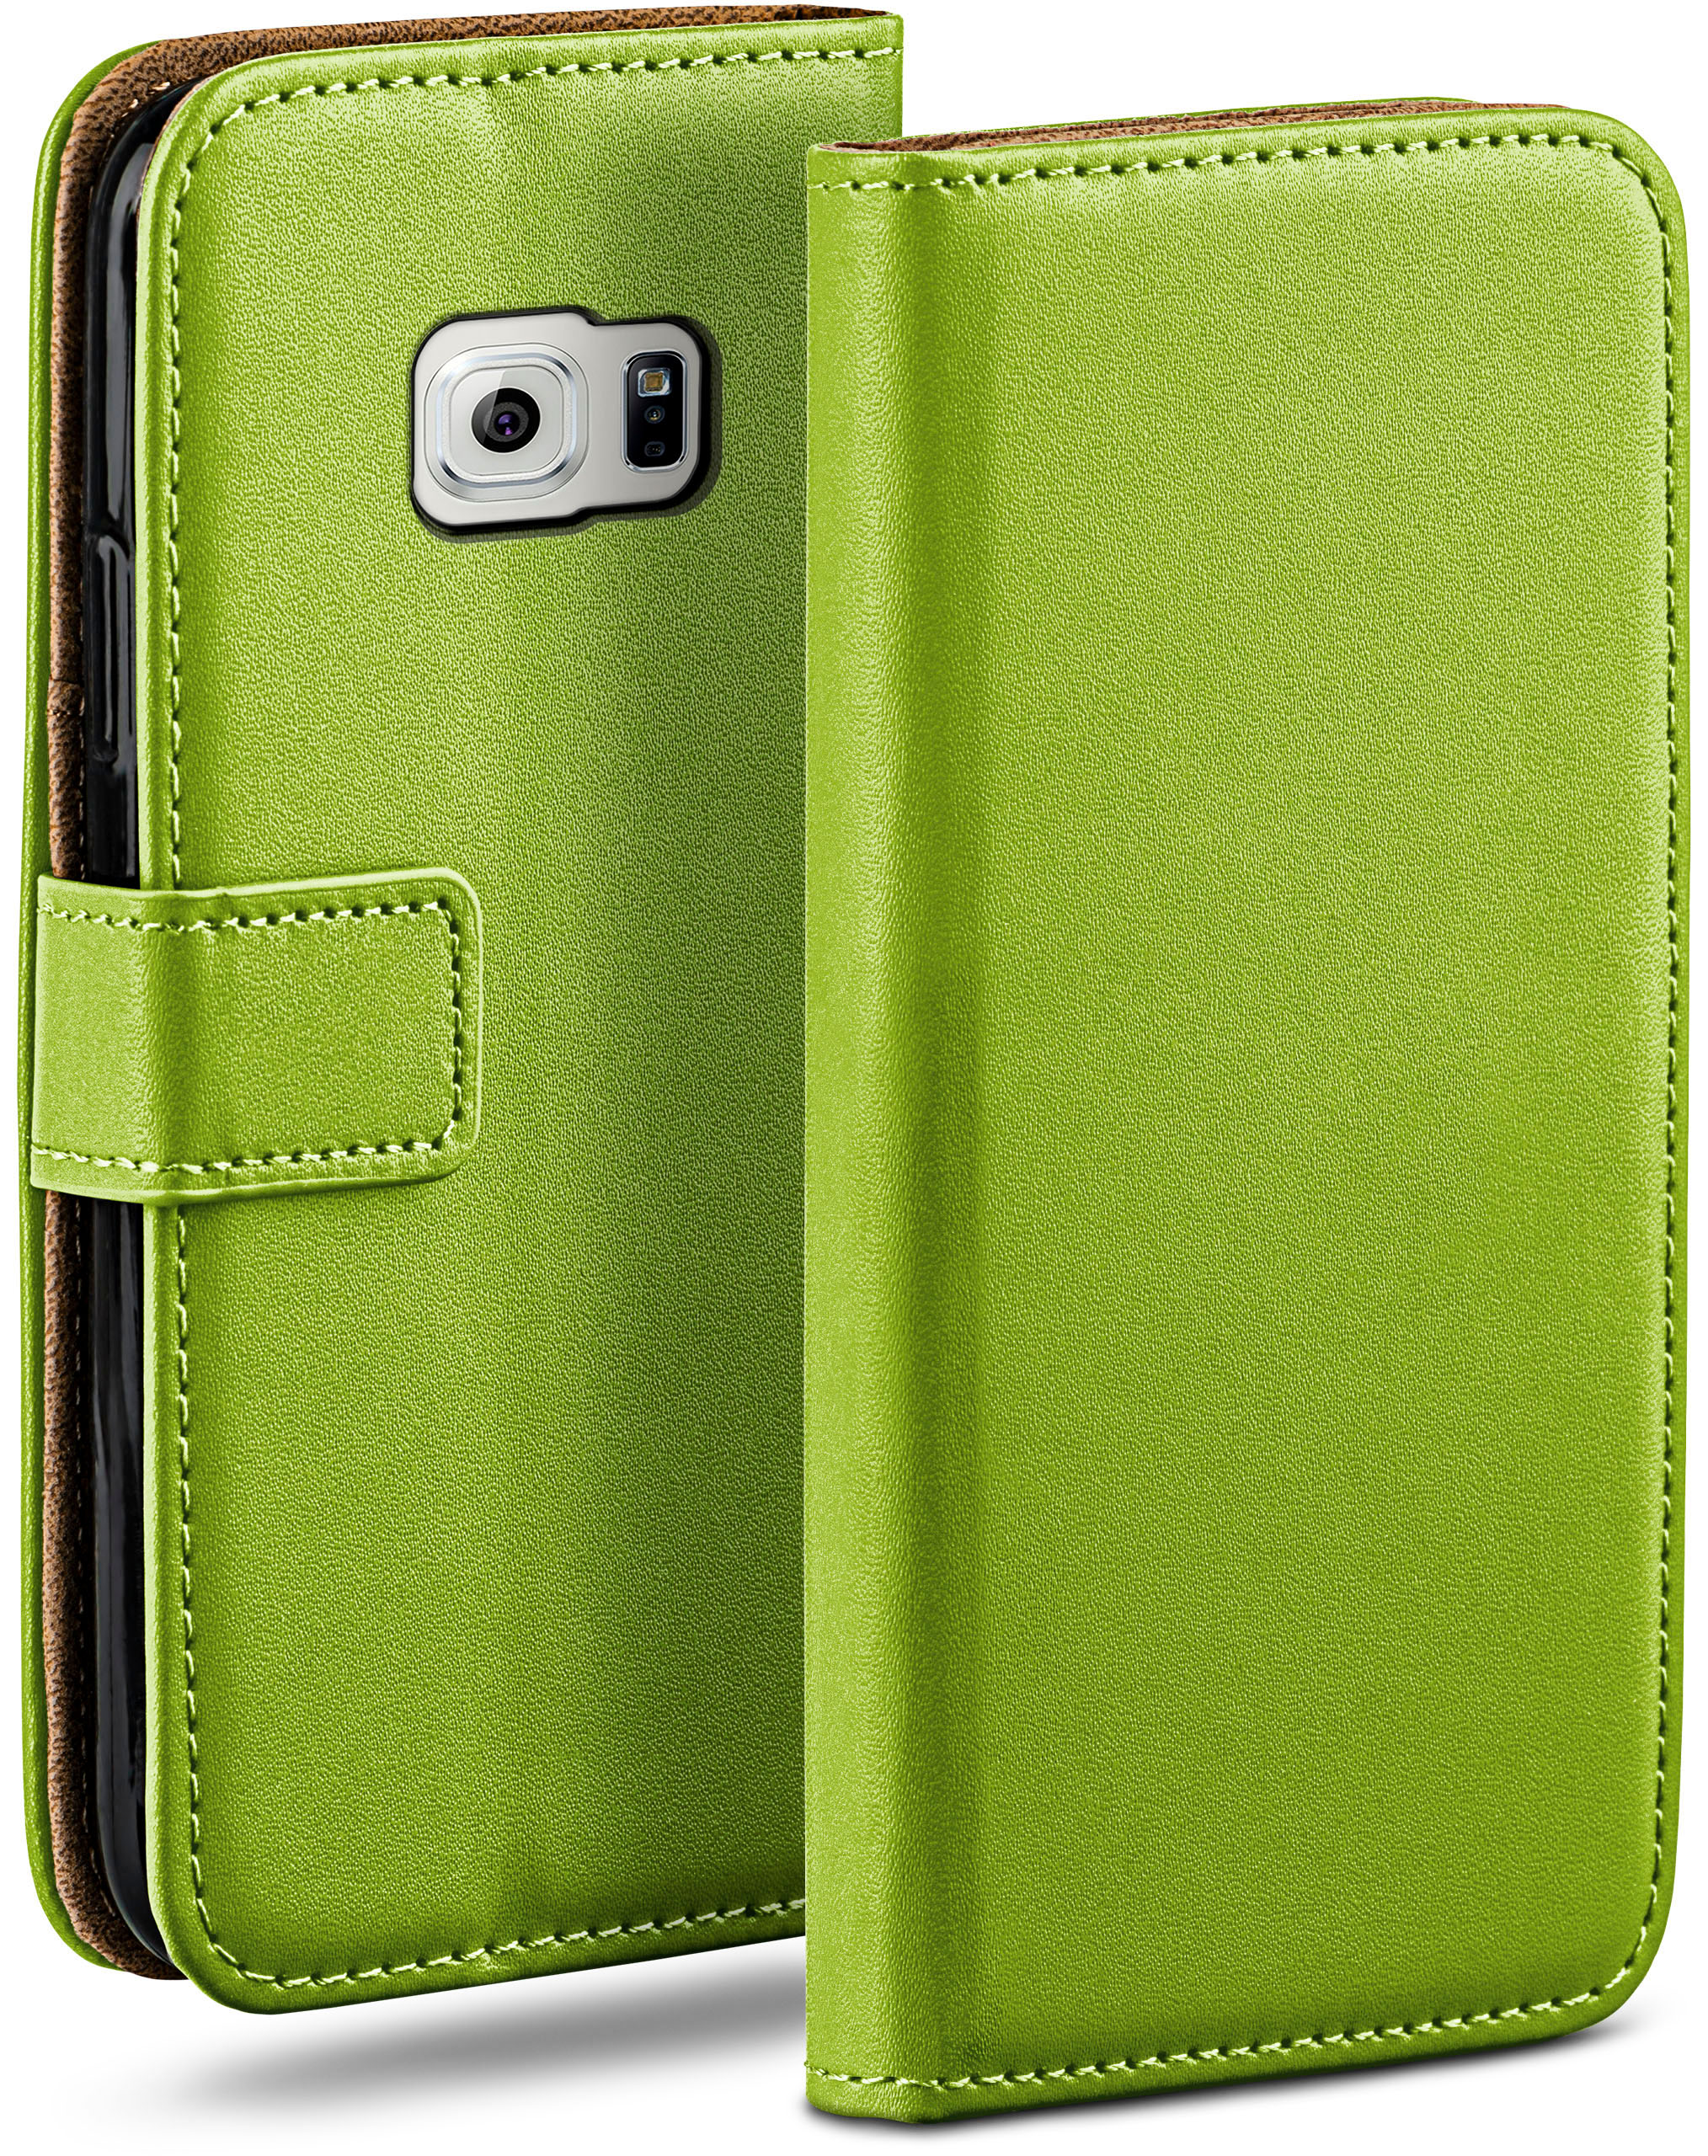 Lime-Green S6, Bookcover, Book MOEX Galaxy Samsung, Case,